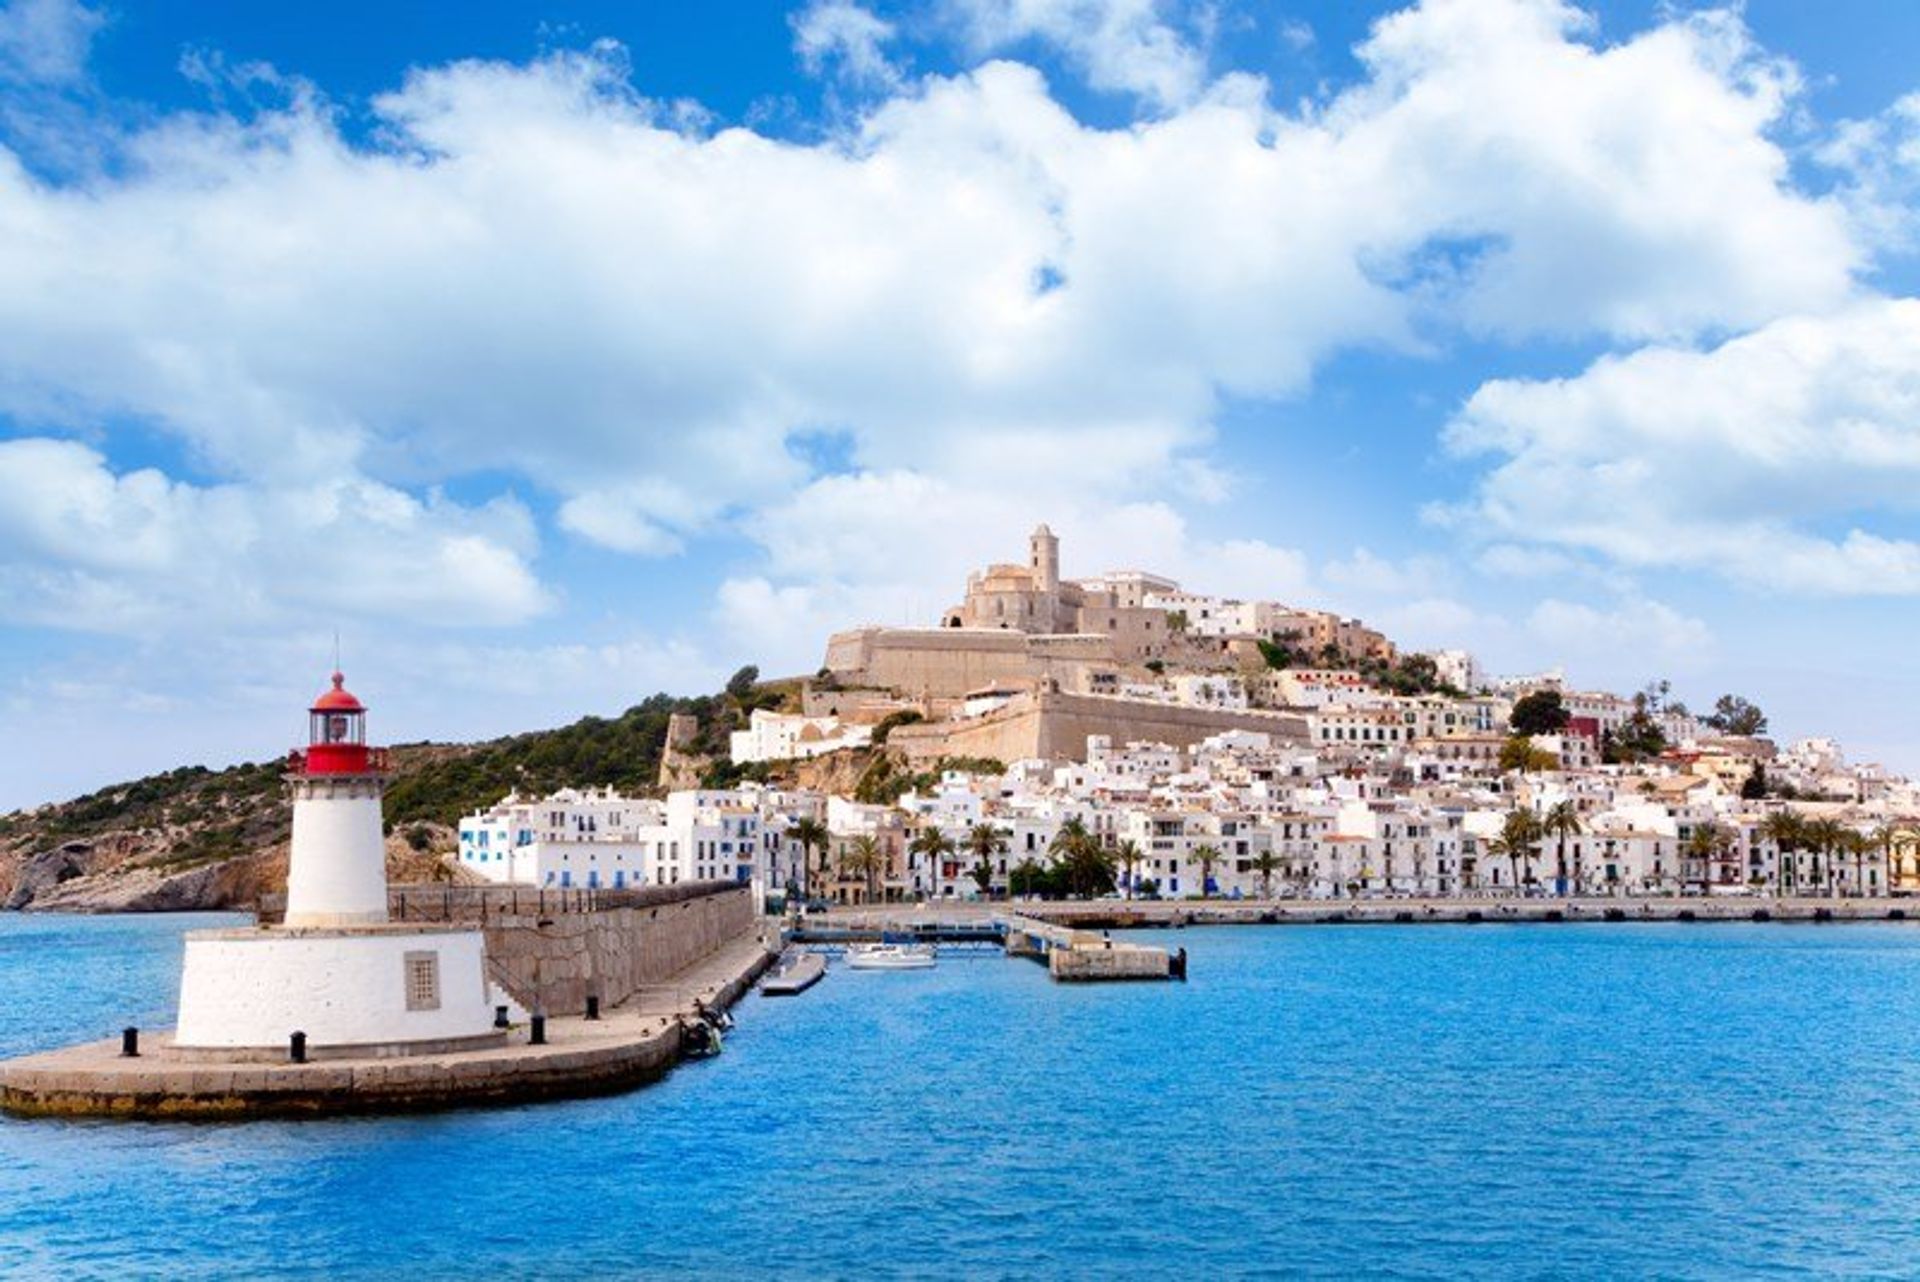 The old town Eivissa, viewed from the sea